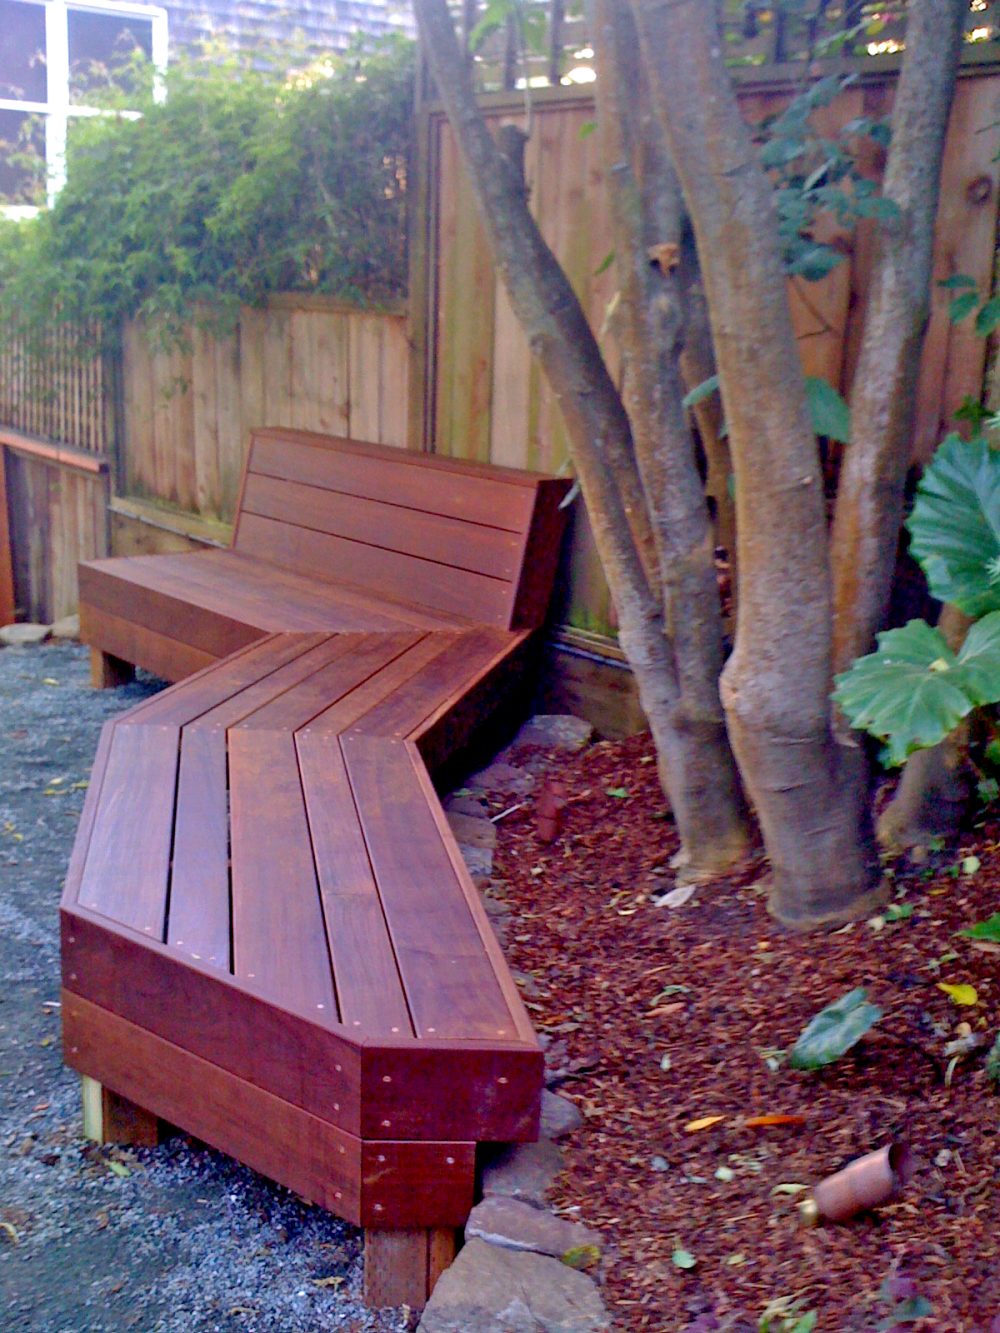 Redish stained 3 piece bench cut to angle around a tree